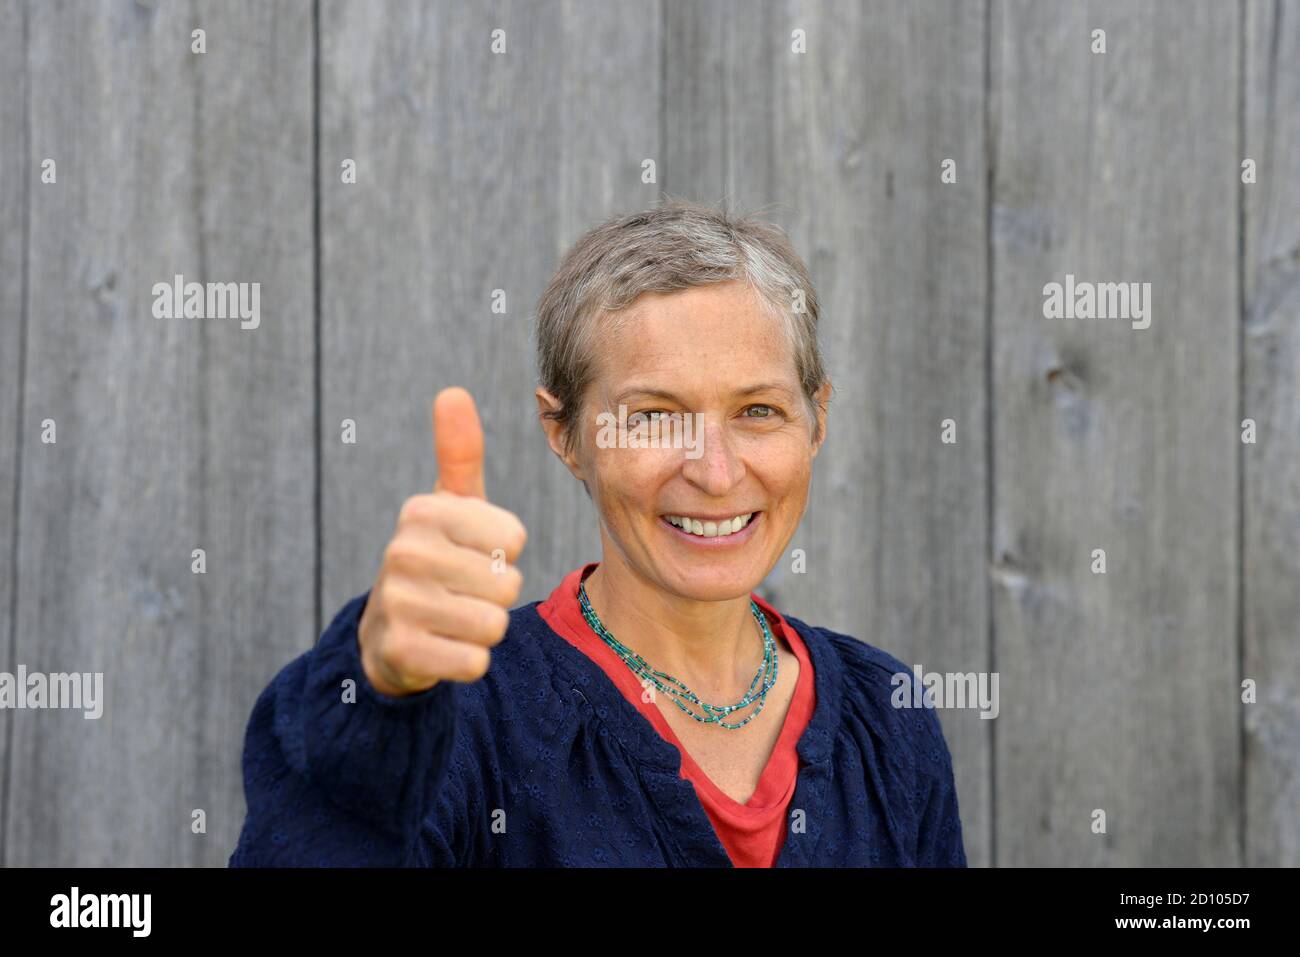 Optimistic middle-aged Caucasian country woman with short hair (modern homesteader) smiles and shows thump up, in front of old barn wood background. Stock Photo